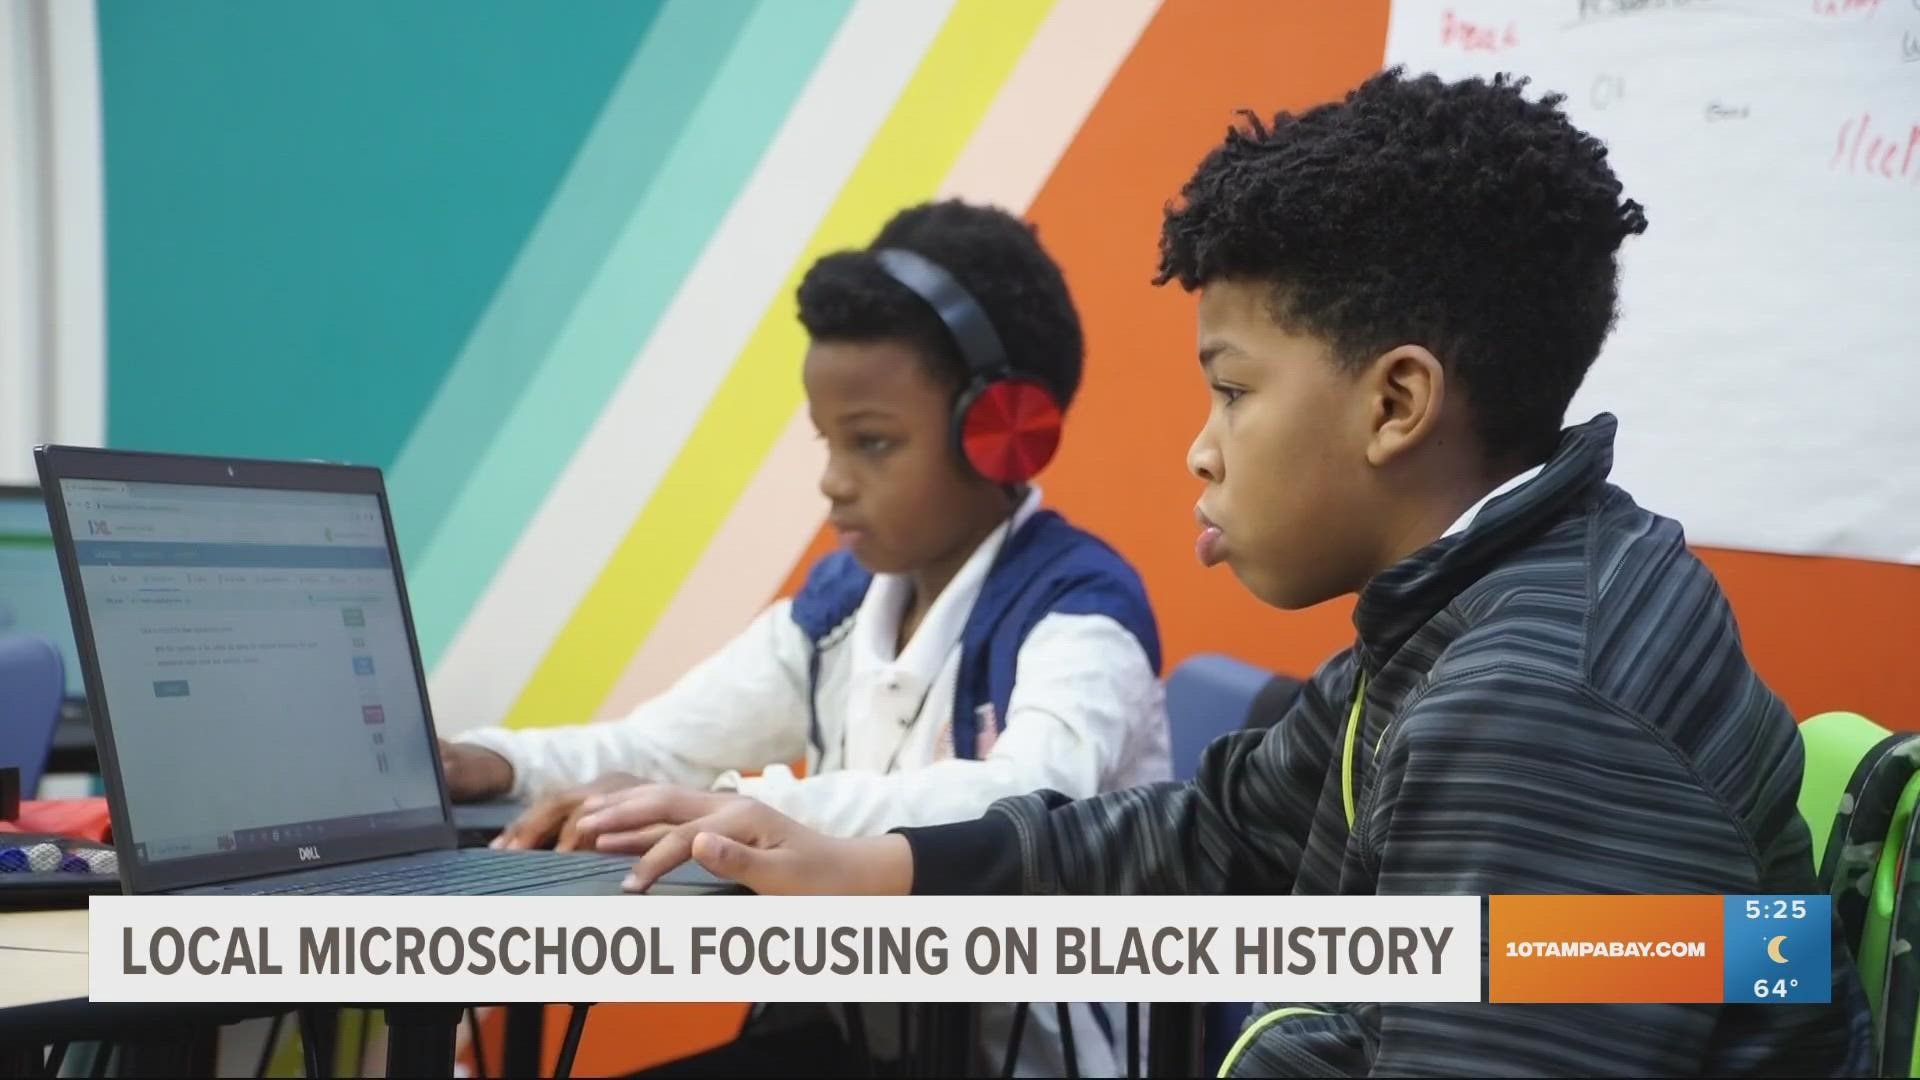 Manifestation School for Innovation and Learning includes lessons about lesser-known Black people and the important role they play in American history.